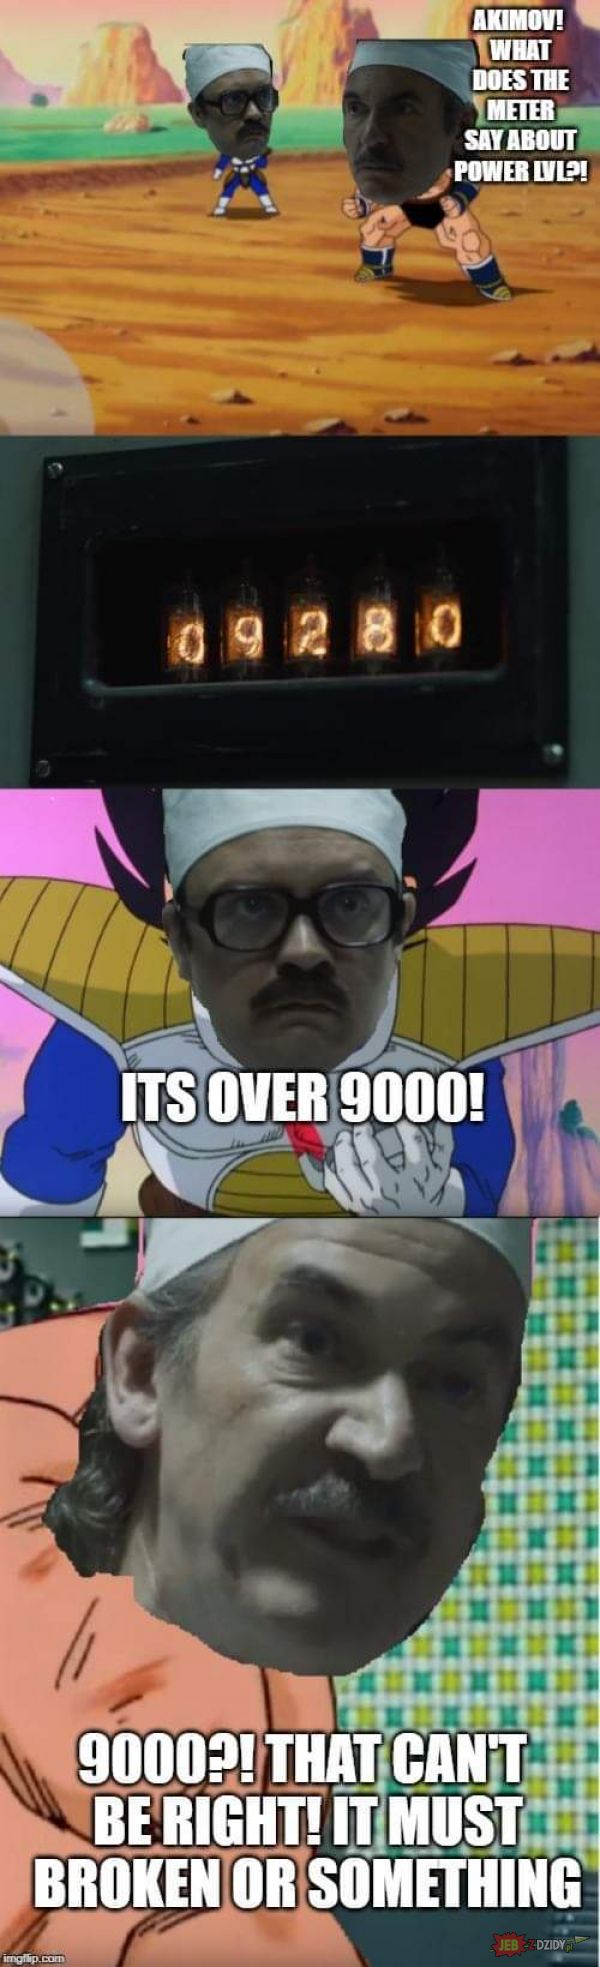 Its over 9000